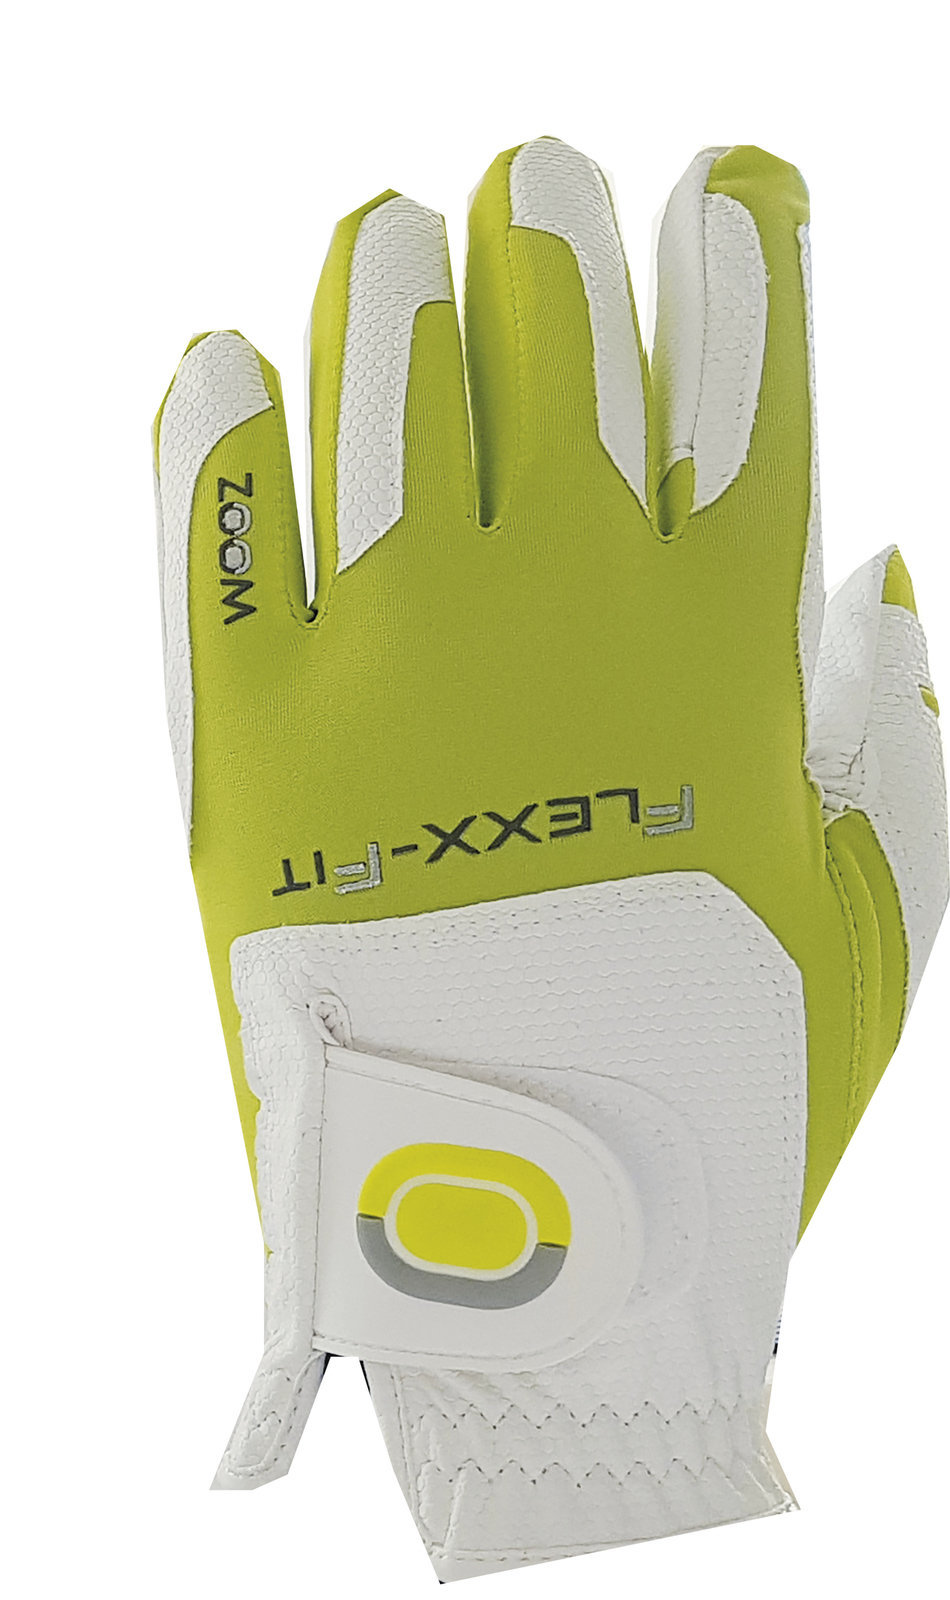 guanti Zoom Gloves Weather Mens Golf Glove White/Lime LH